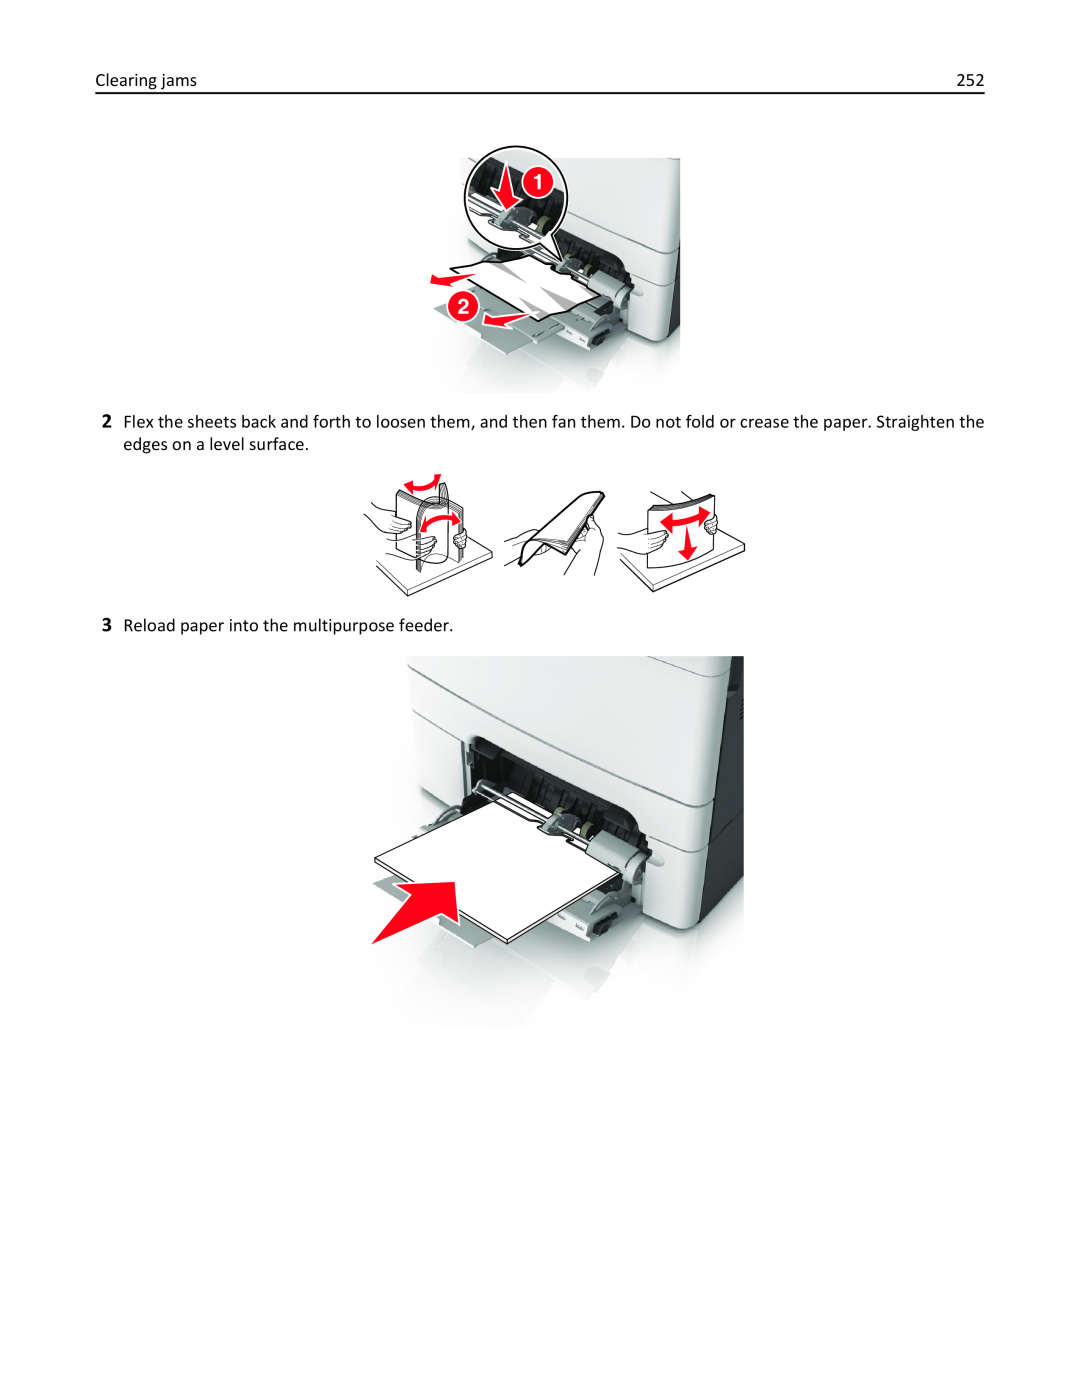 Lexmark 436 manual Clearing jams, Reload paper into the multipurpose feeder 